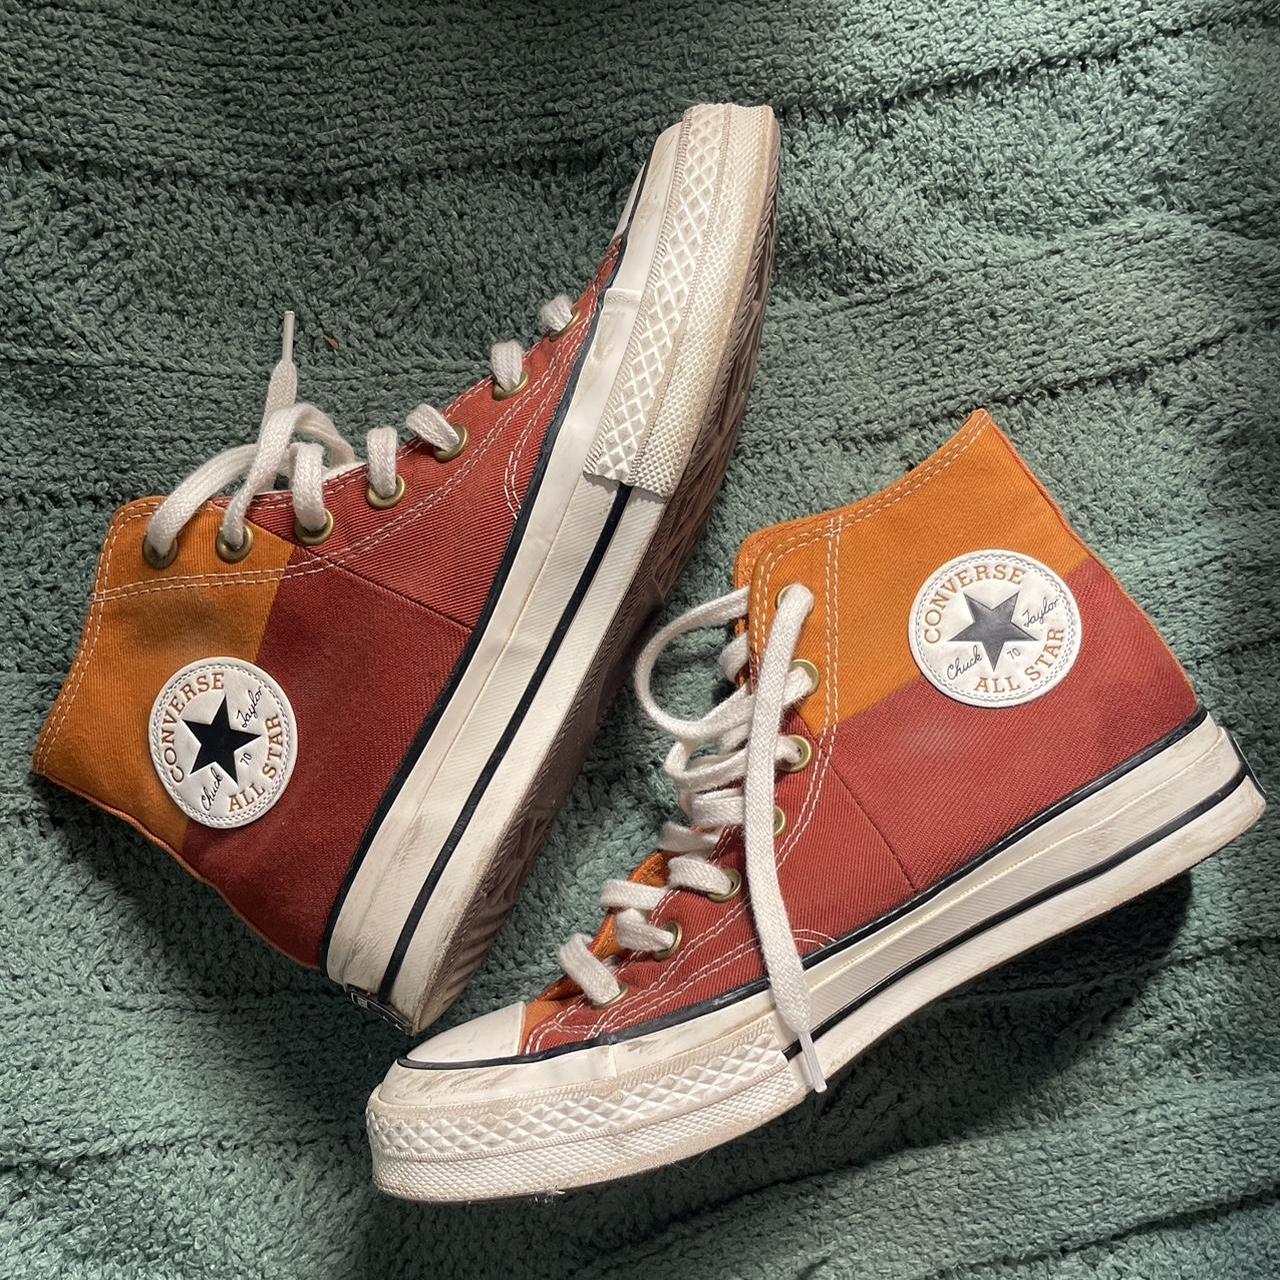 Converse high top chuck 70 in orange and red